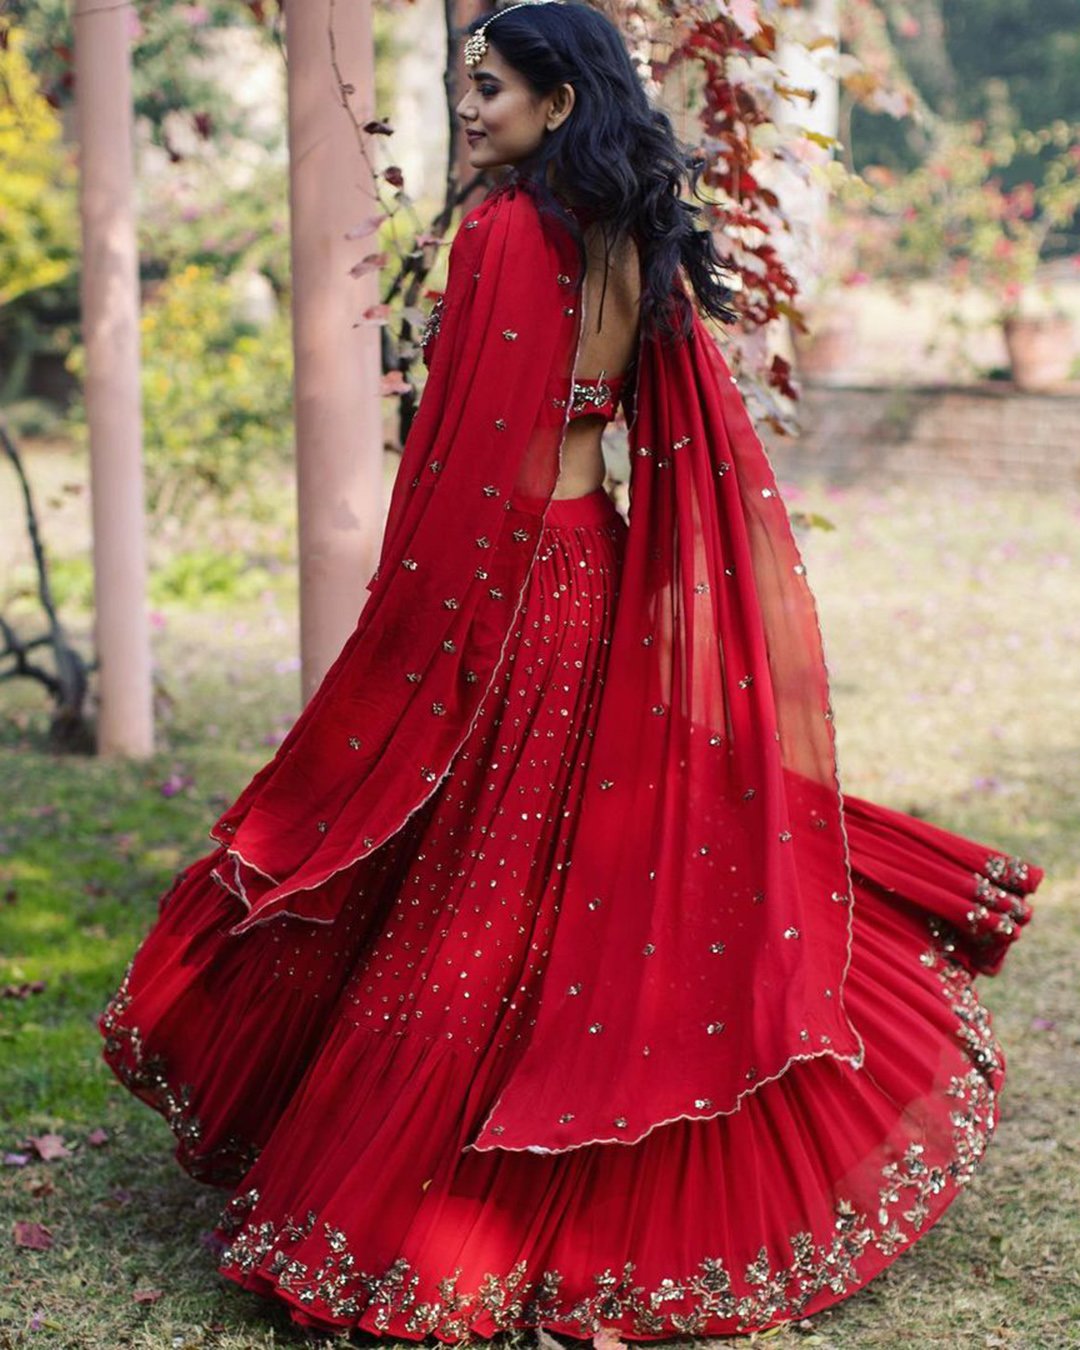 modern red indian wedding dresses,indian style wedding skirt and top,bride red wedding dresses,wedding indian gown dress,indian wedding party wear dresses,simple indian dress,simple beautiful indian dress,wedding lehenga for girls,indian simple ghagra dress,indian red bridal gown,designer traditional indian wedding dresses,lehenga modern red indian wedding dresses,royal blue hindu wedding indian wedding dresses,traditional royal blue indian wedding dresses,